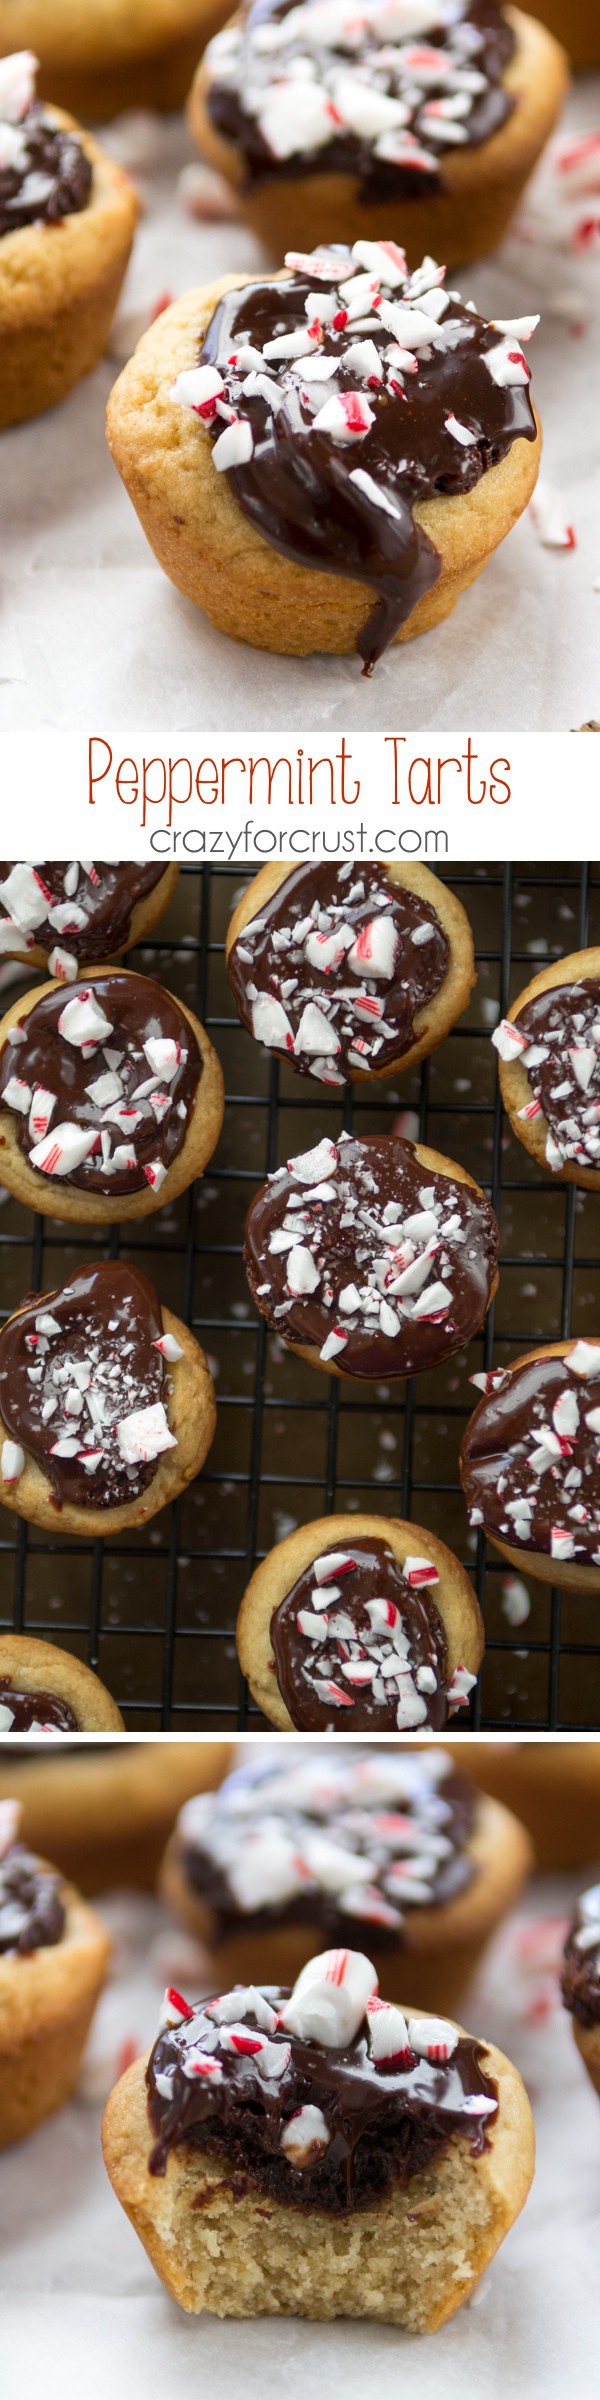 Peppermint Tassies made with sugar cookies and chocolate ganache!